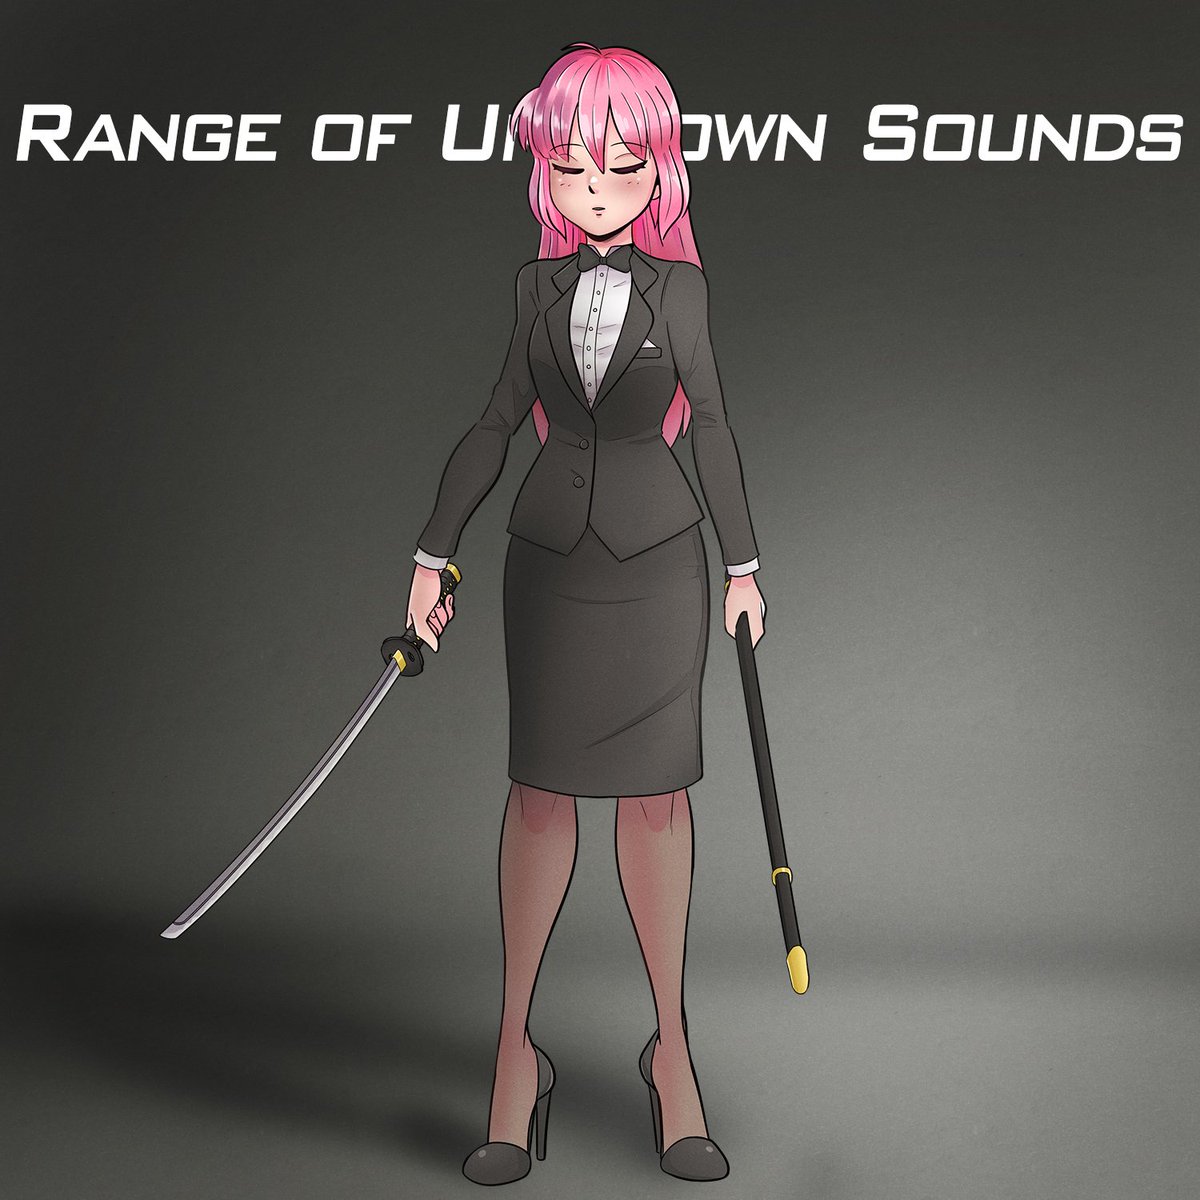 What's your favorite track from RANGE OF UNKNOWN SOUNDS? linktr.ee/sakuraylee